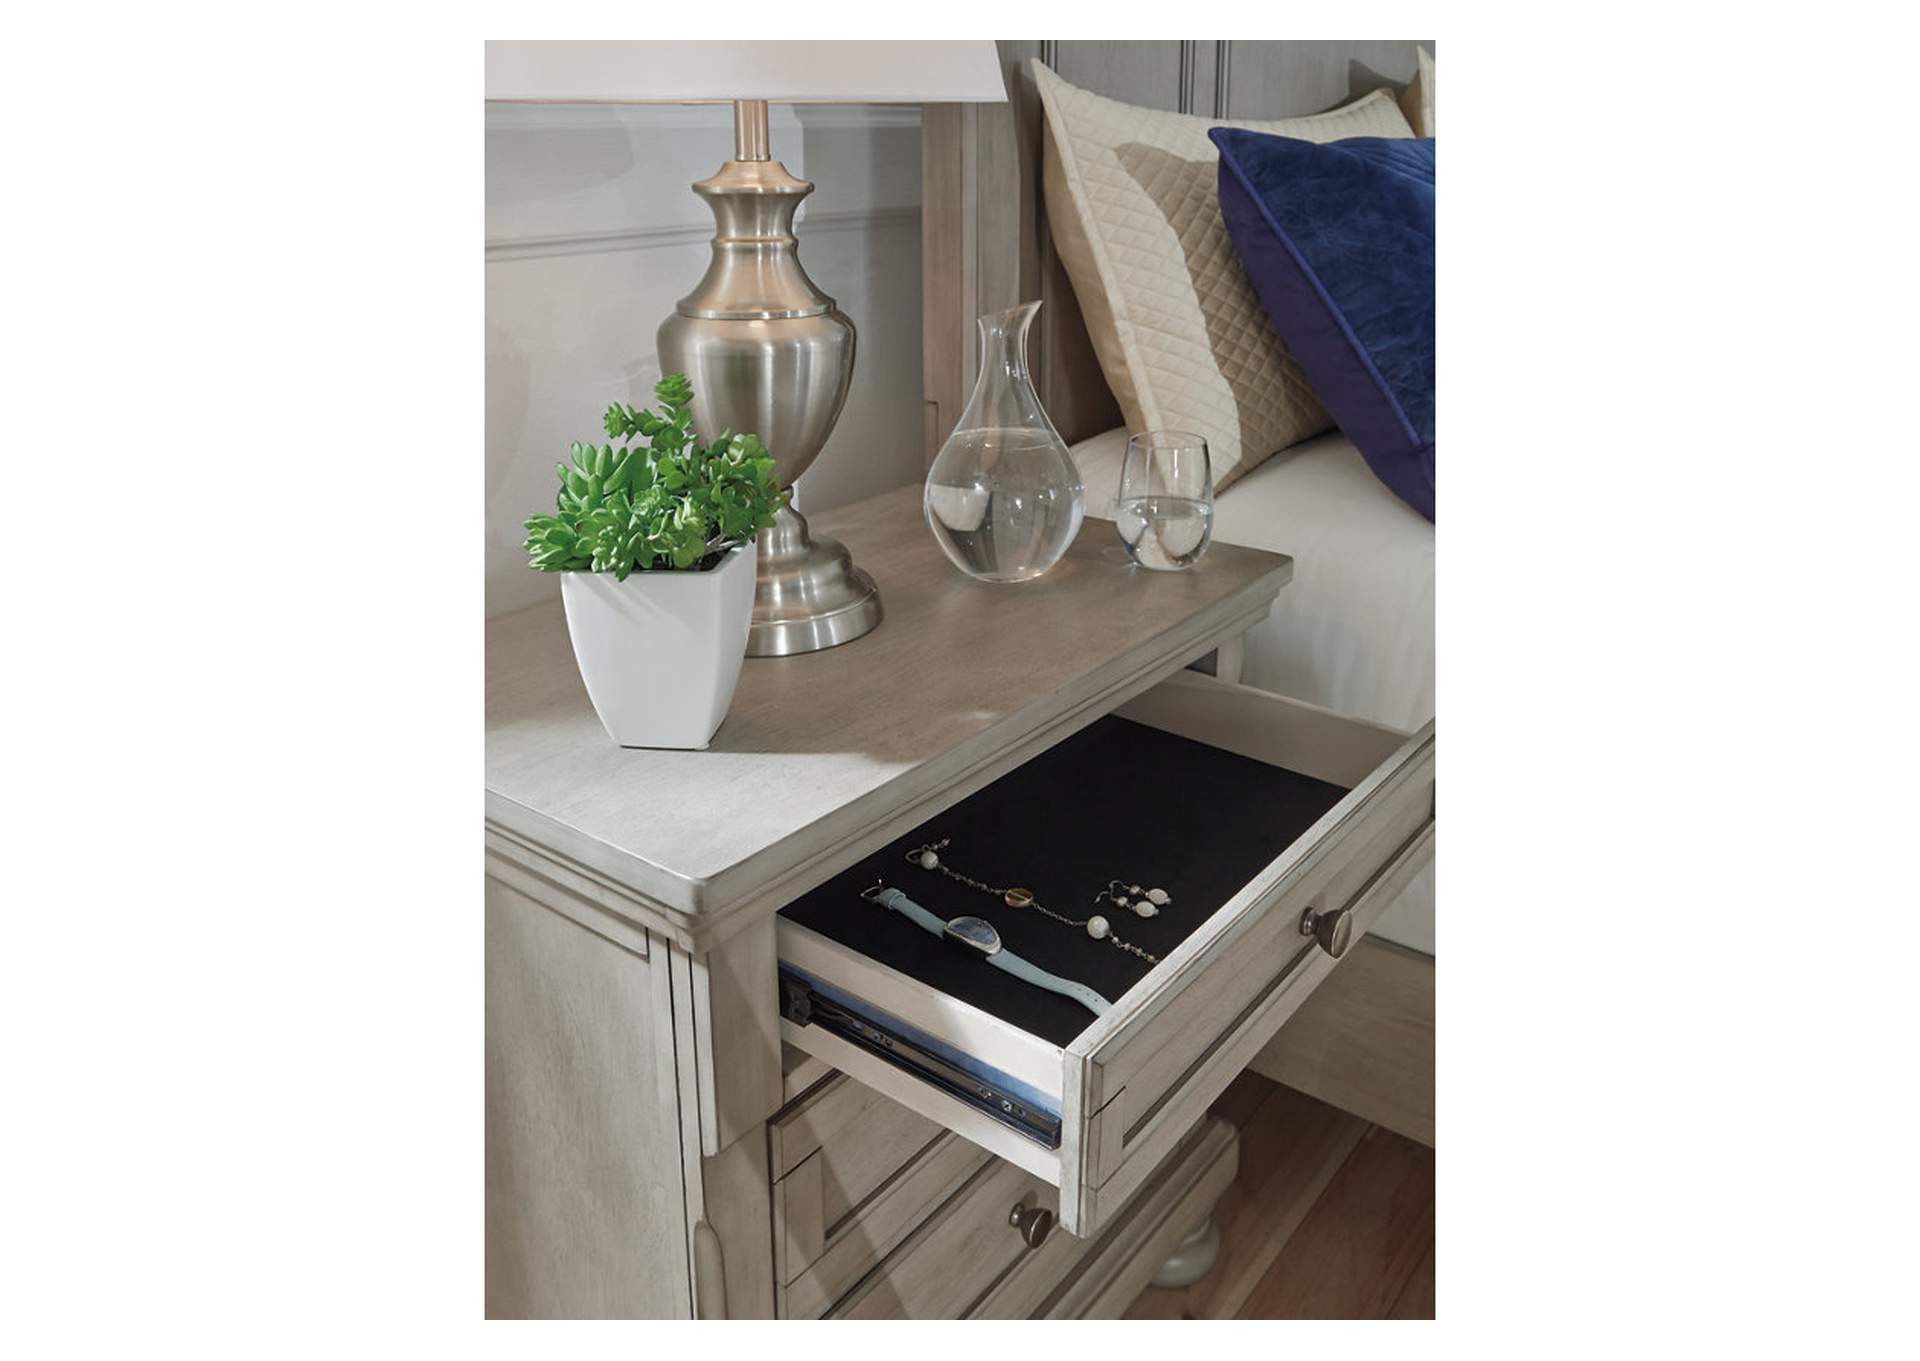 Lettner Nightstand,Direct To Consumer Express